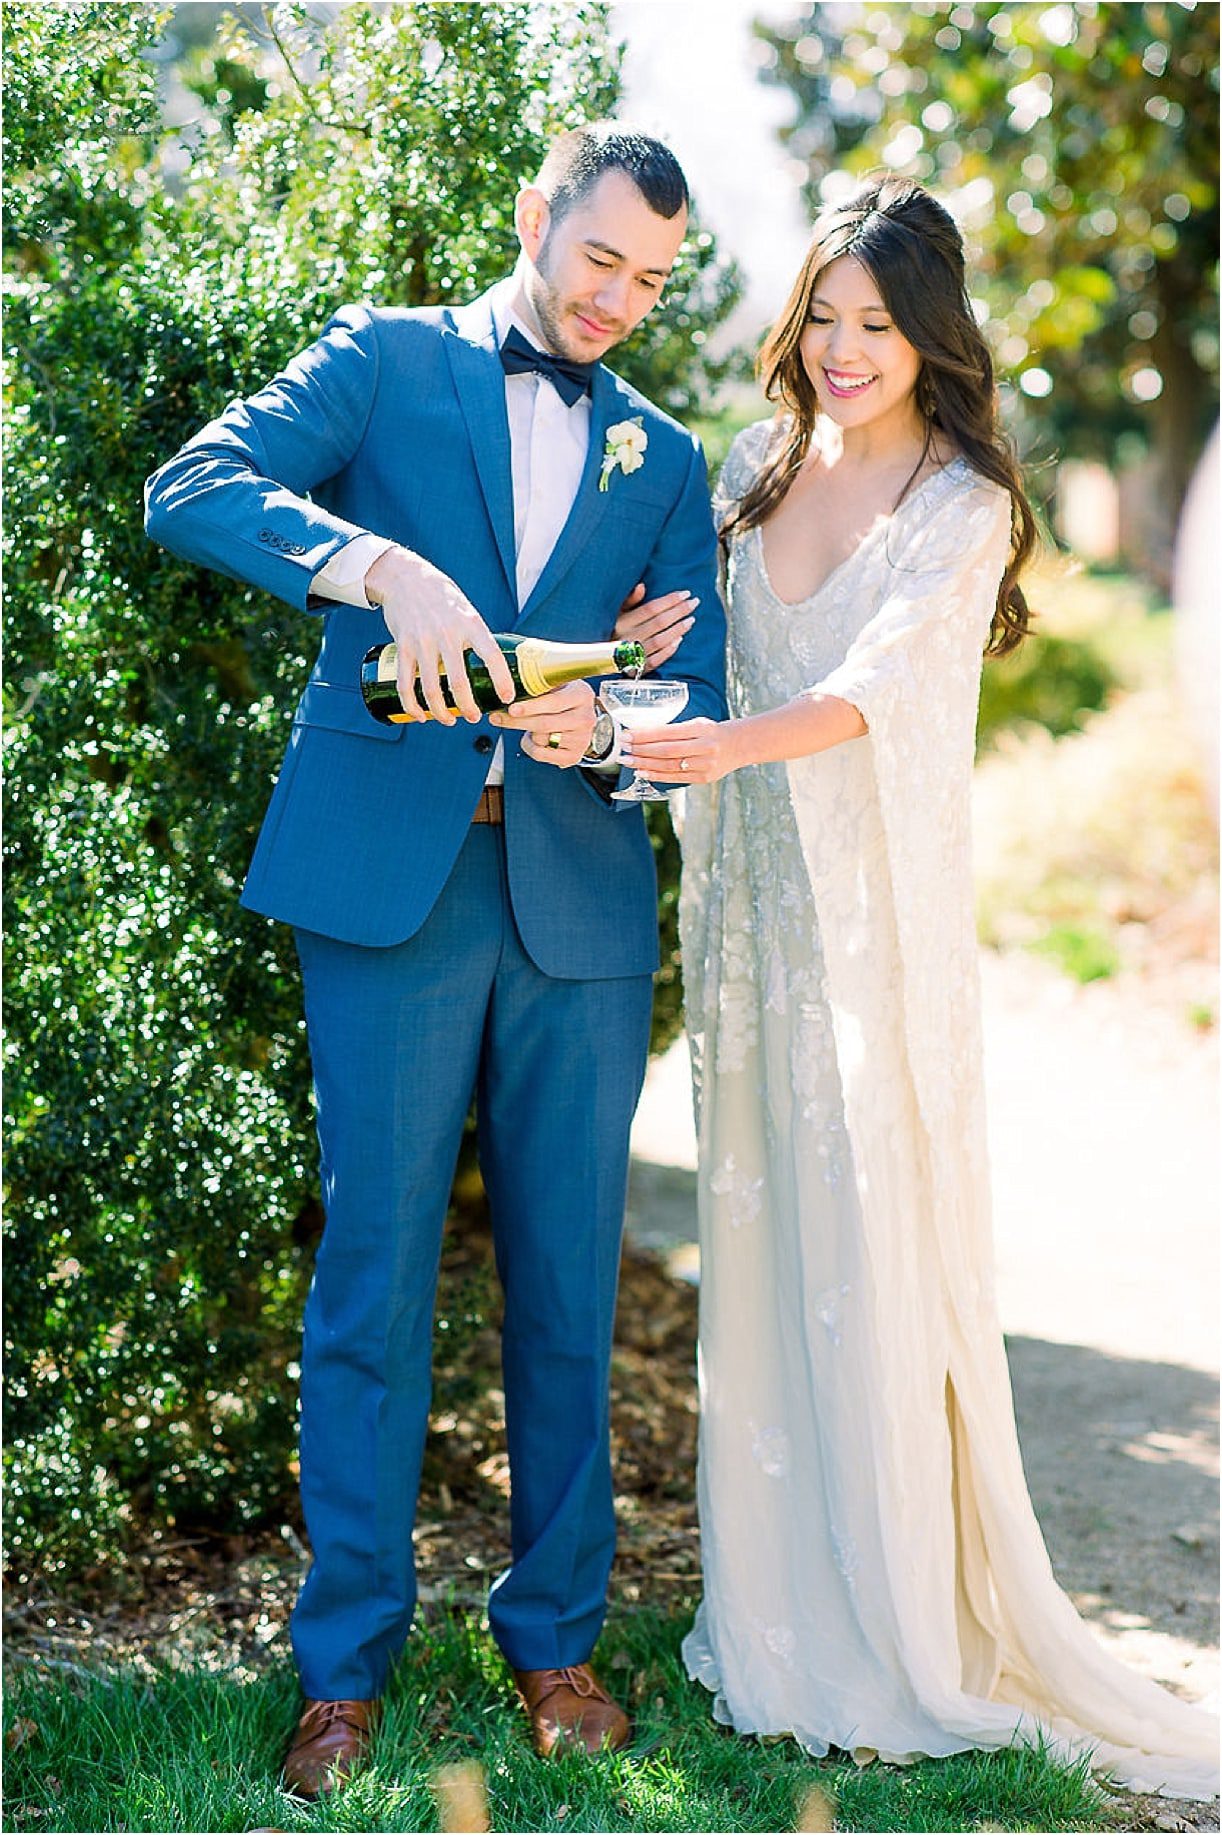 Autumnal Styled Shoot with Unique Spring Wedding Colors | Hill City Bride Virginia Wedding Blog Reception Champagne Groom Celebrate